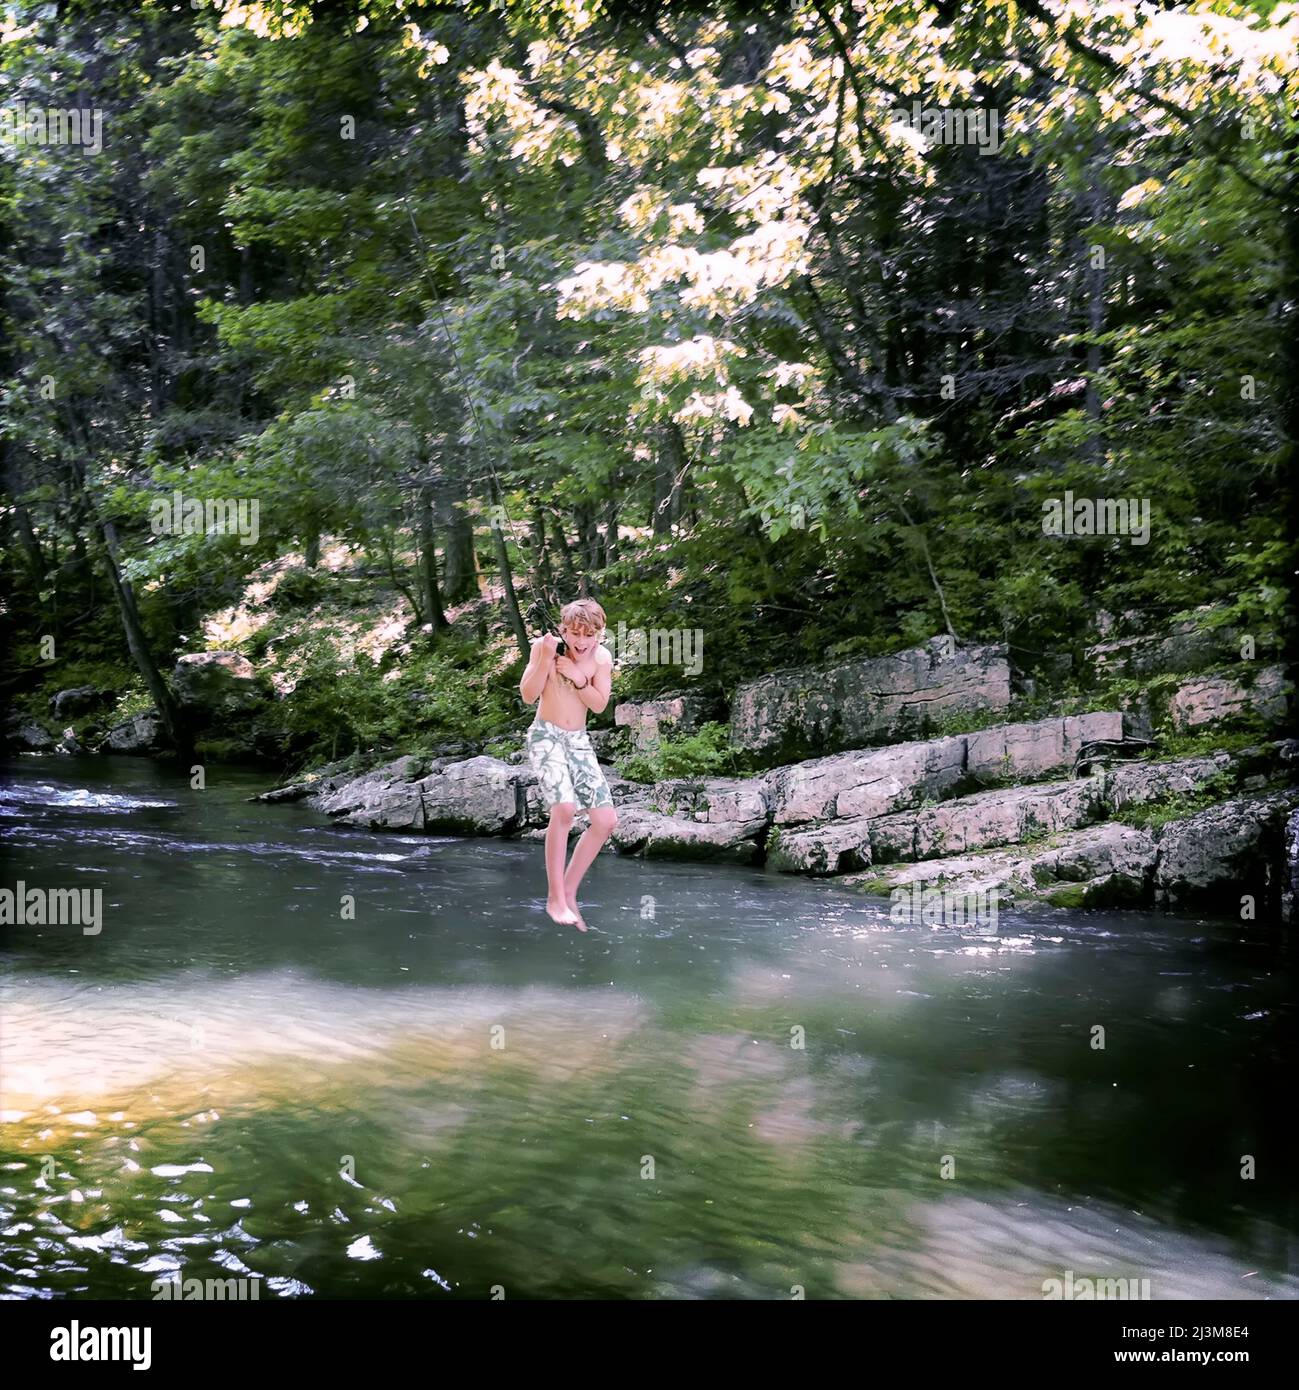 A boy swings out over a swimming hole on a rope swing on a summer day.; Highland County, Virginia, United States. Stock Photo